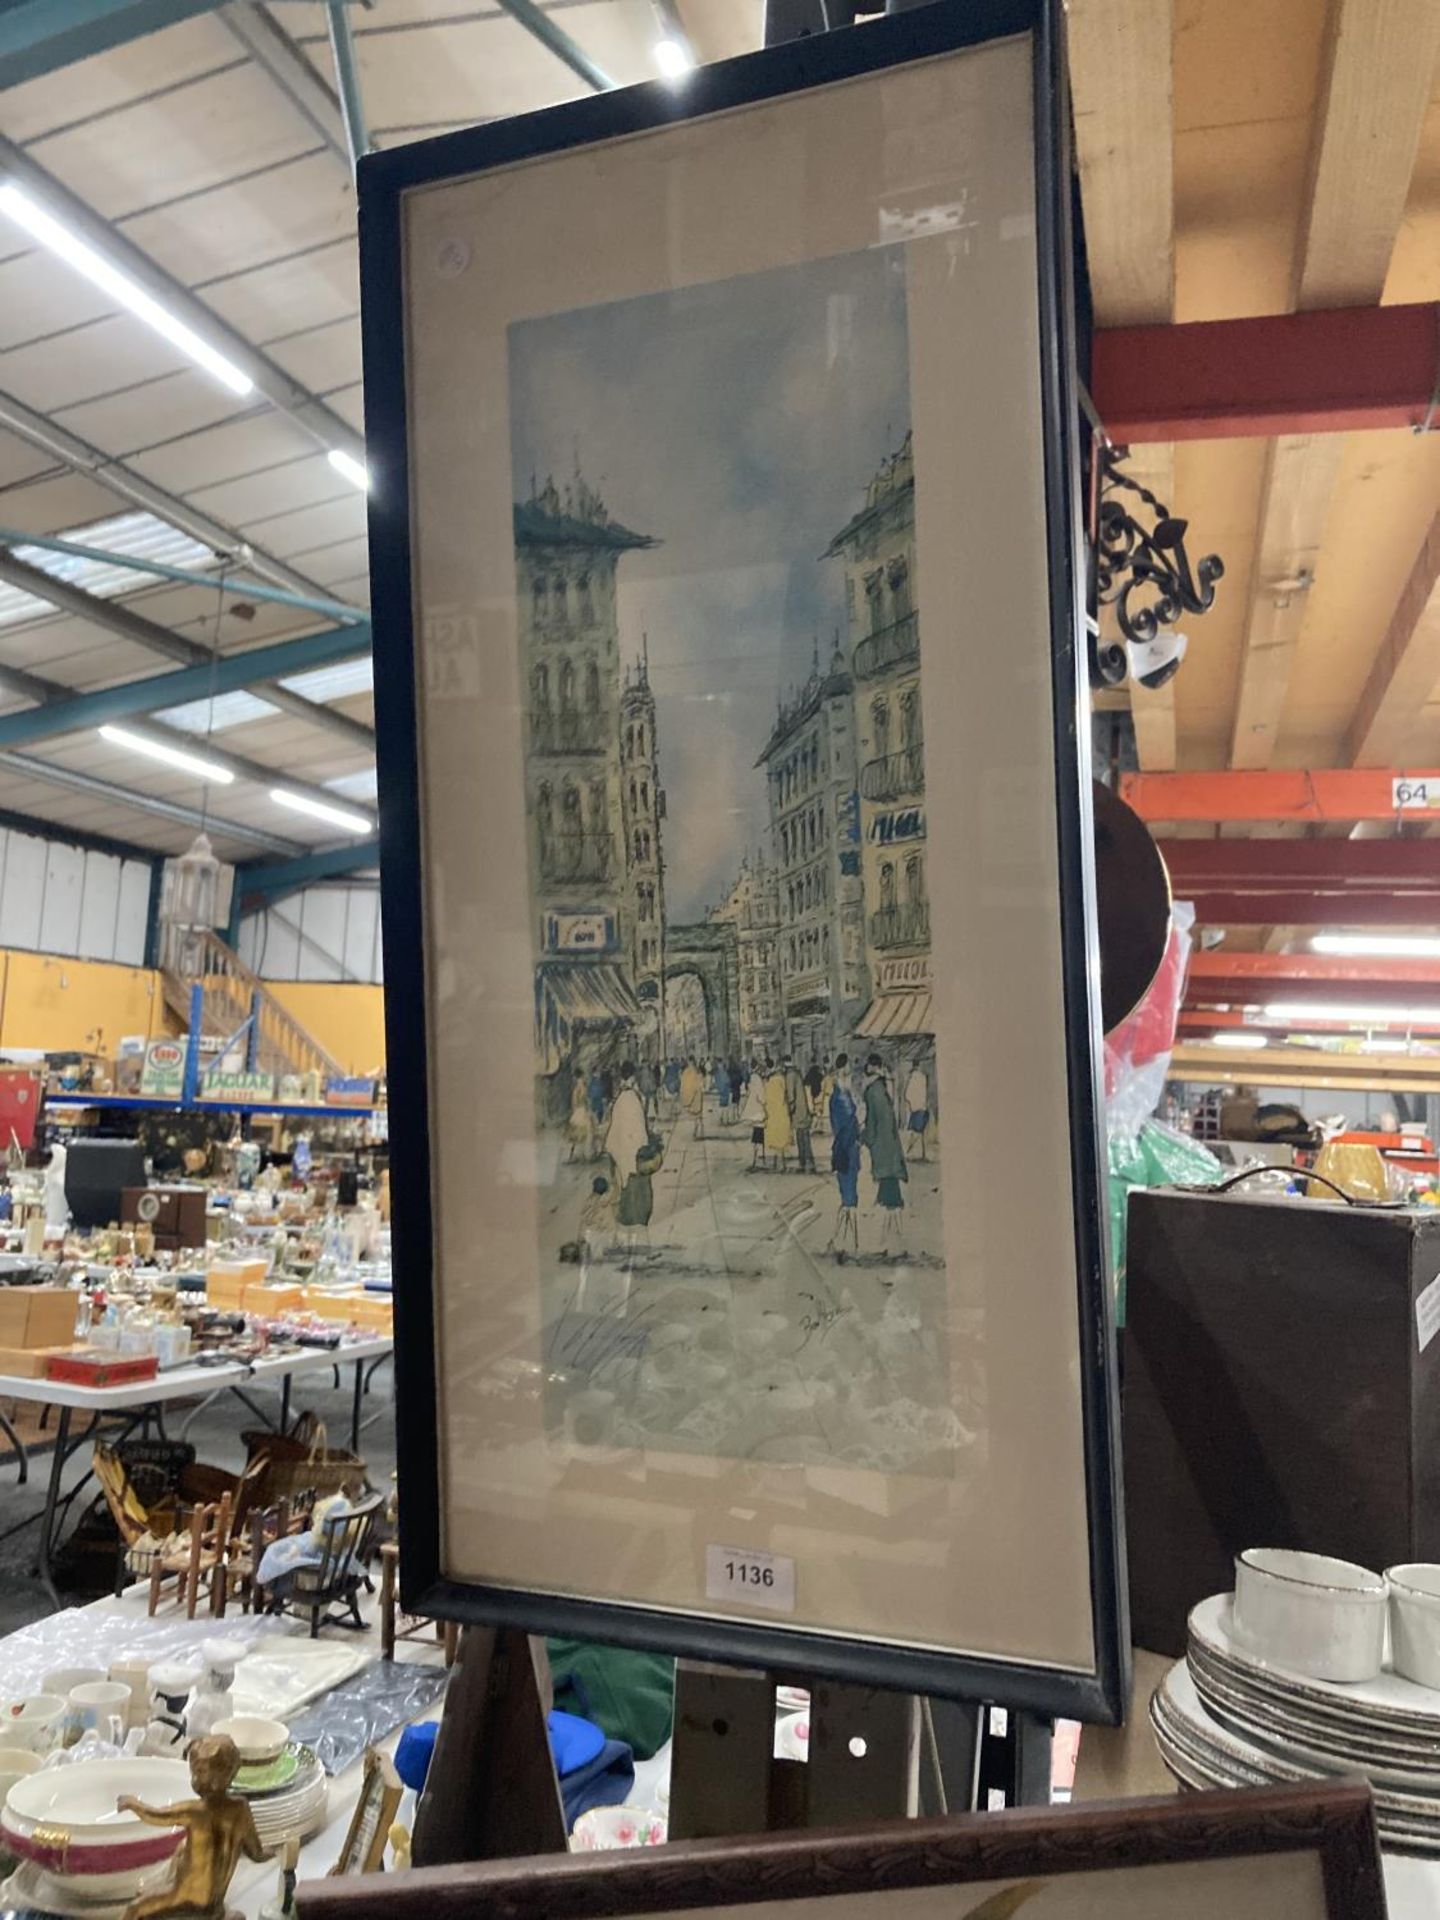 TWO FRAMED PRINTS, ONE OF A BUTTERFLY, THE OTHER A STREET SCENE